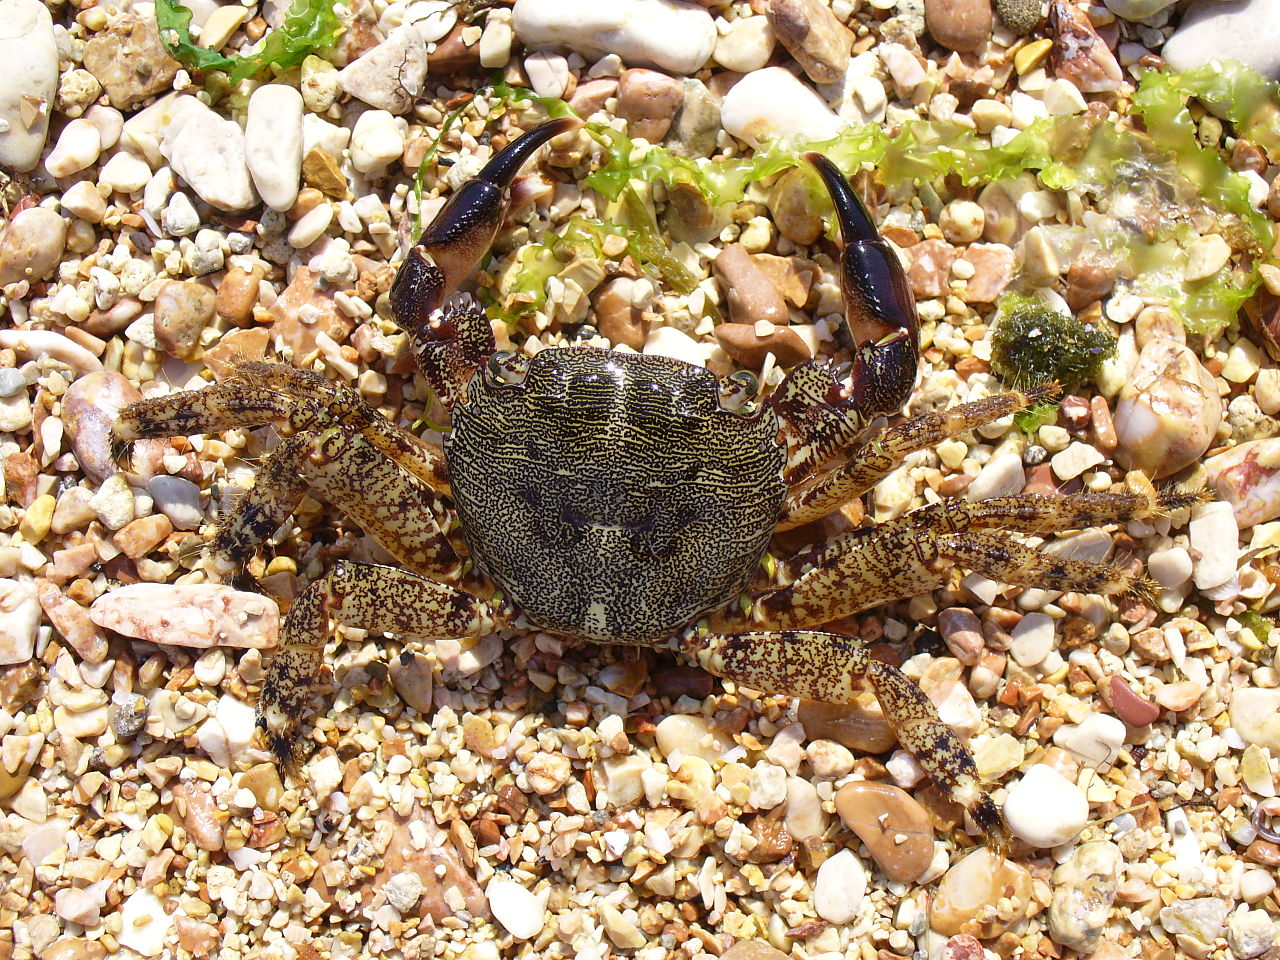 Мраморлық краб (Pachygrapsus marmoratus)